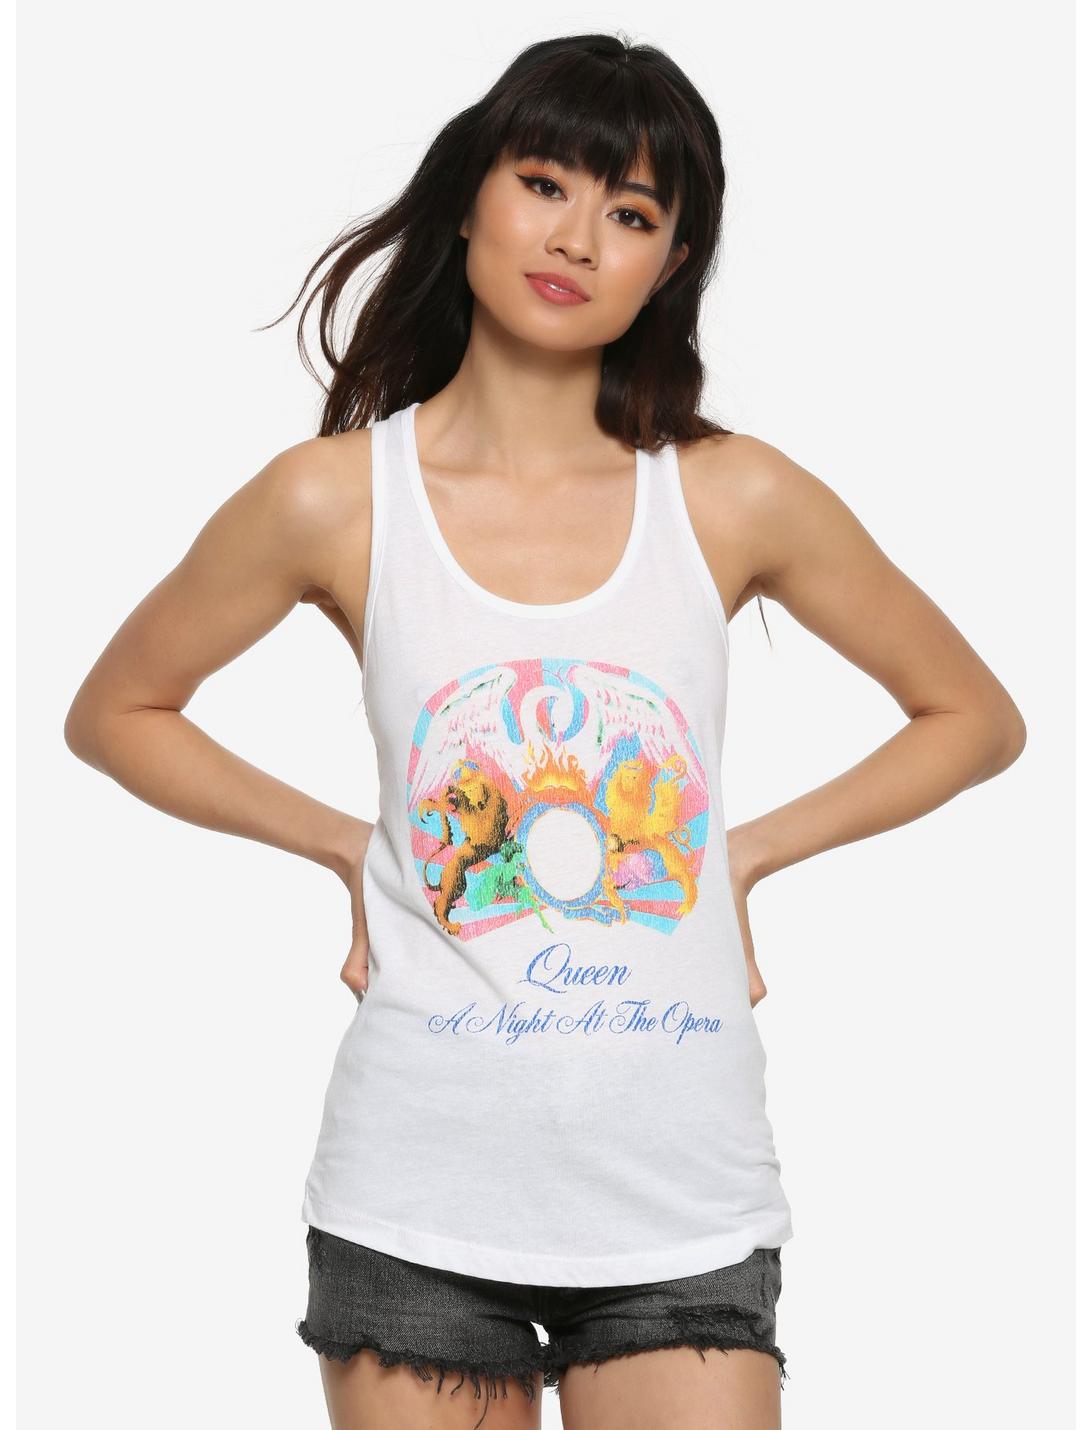 Queen A Night At The Opera Album Cover Girls Tank Top, WHITE, hi-res